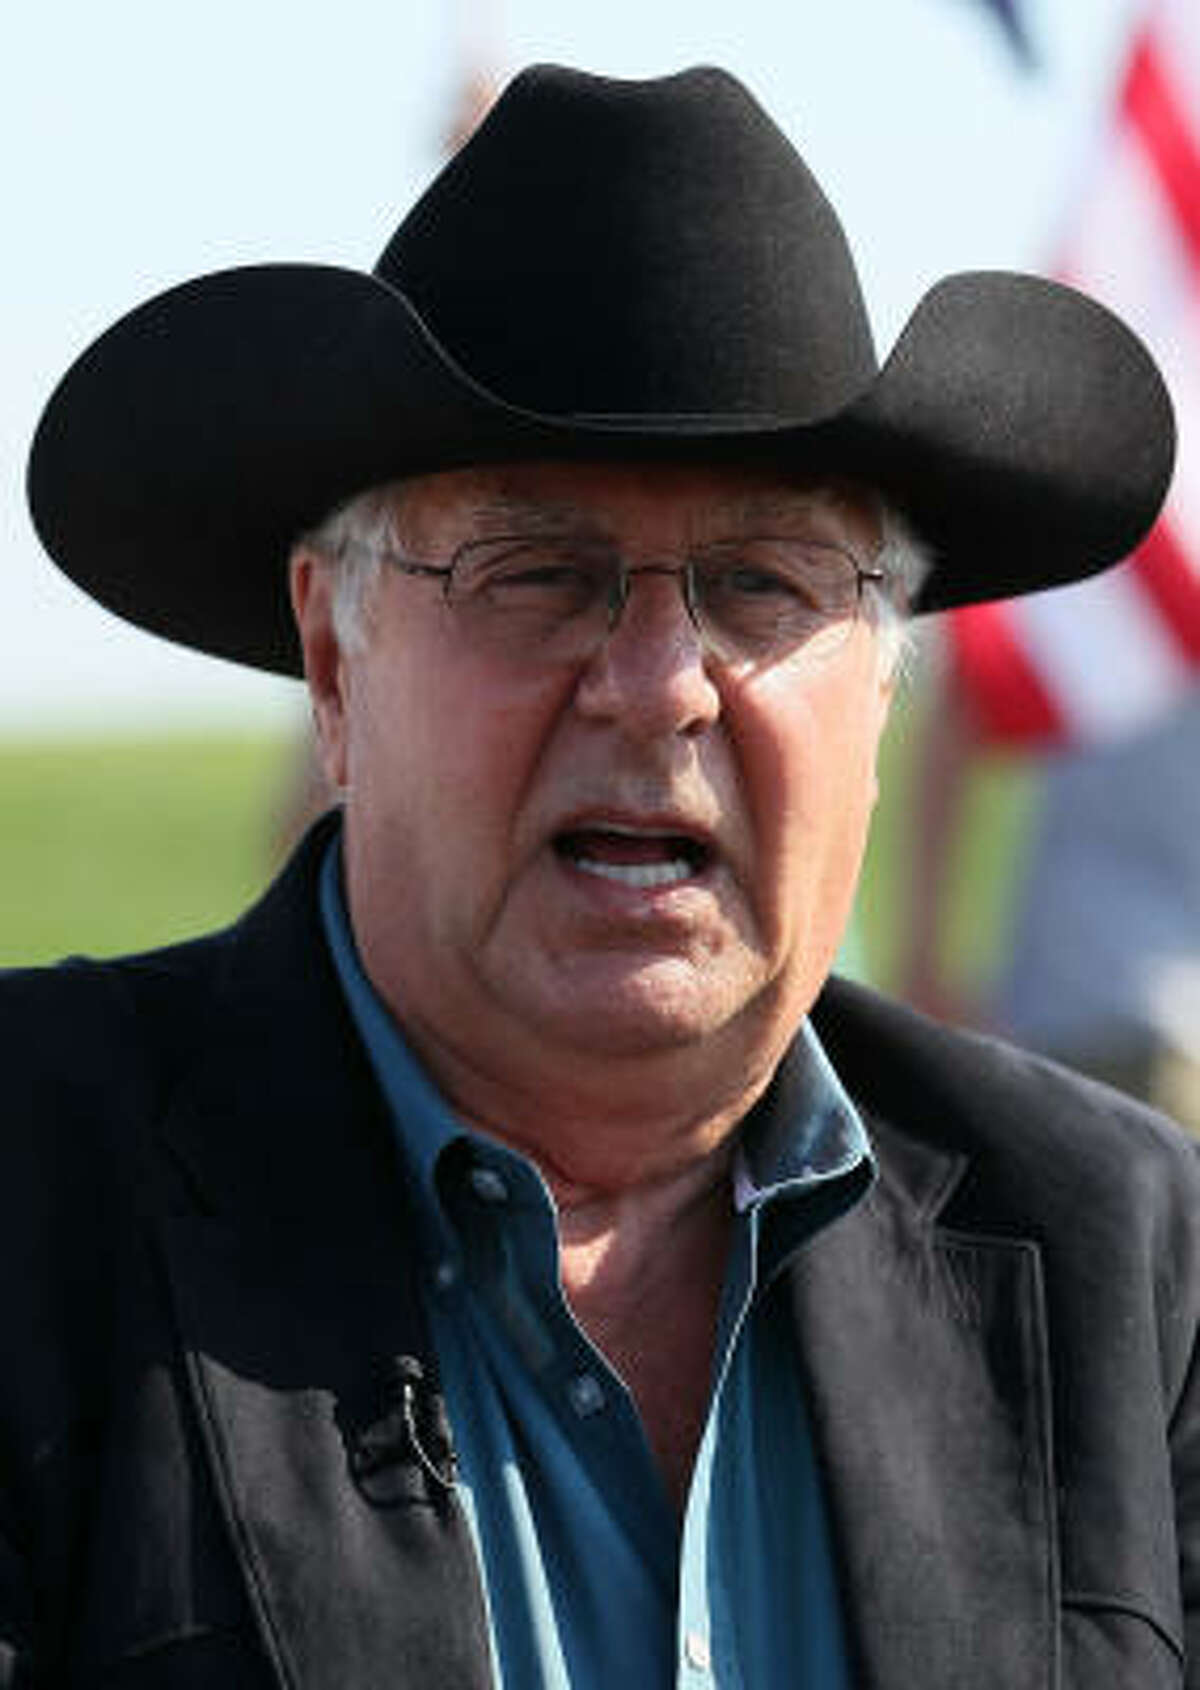 Dick Armey. As the leader of FreedomWorks, a conservative political group, the former congressman has been one of the leading organizers, recruiters and intellectual architects of the tea party movement.